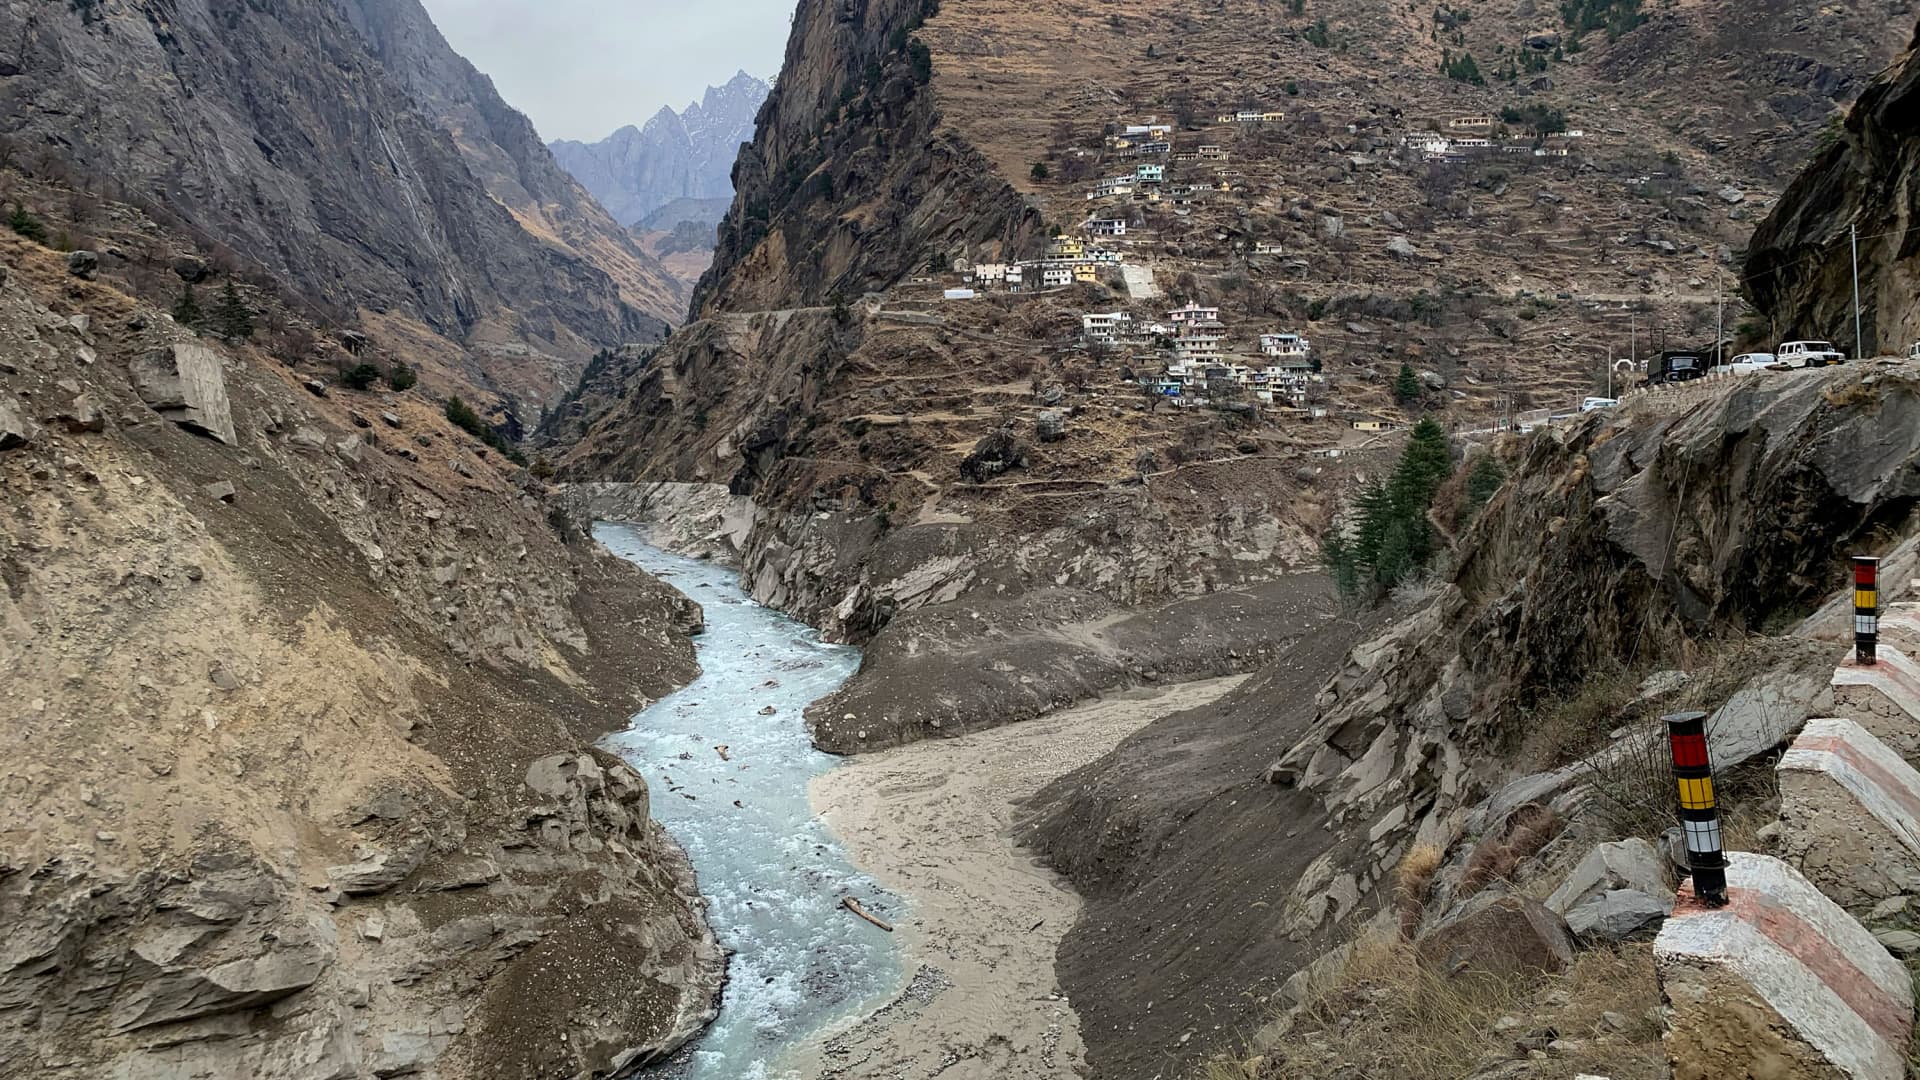 Muddy water flows into Alaknanda river two days after a part of a Himalayan glacier broke off sending a devastating flood downriver in Tapovan area of the northern state of Uttarakhand, India, Tuesday, Feb. 9, 2021.